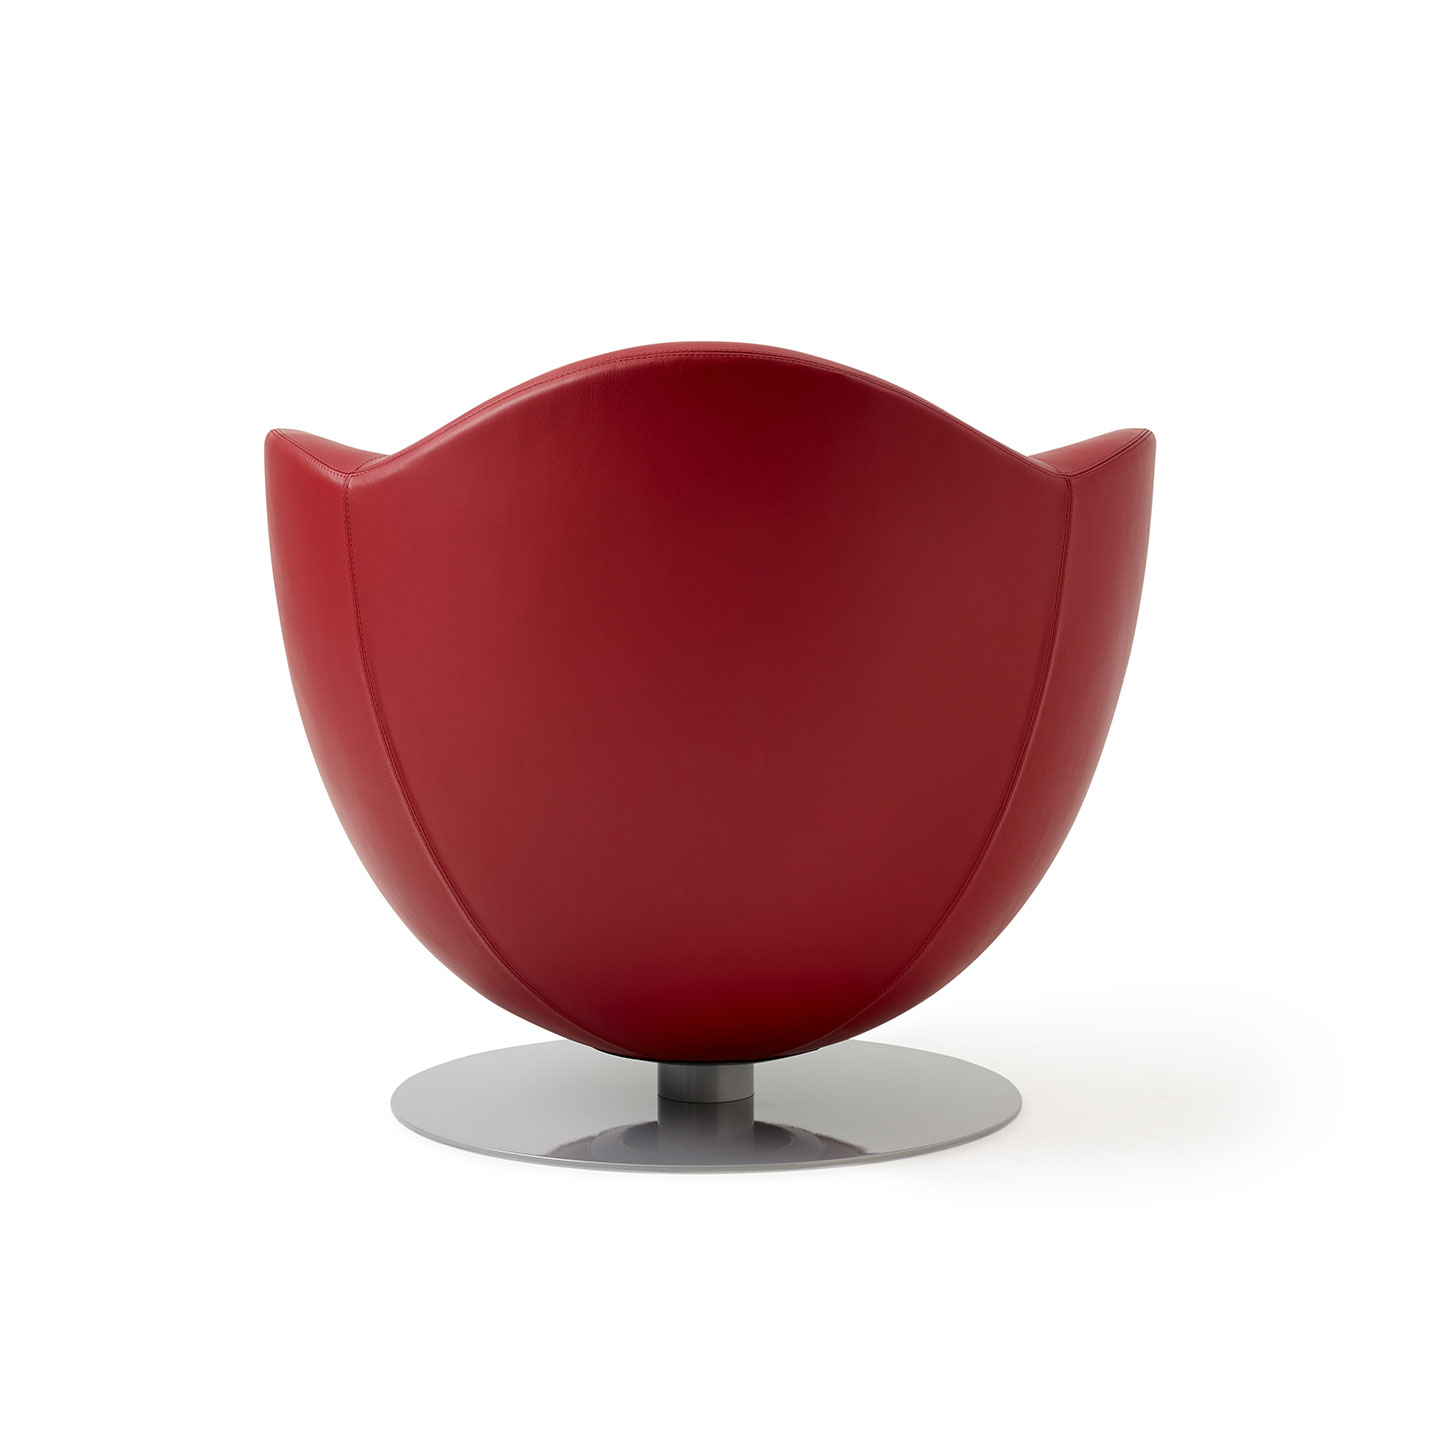 Haworth Dalia lounge chair in red leather as seen from the back